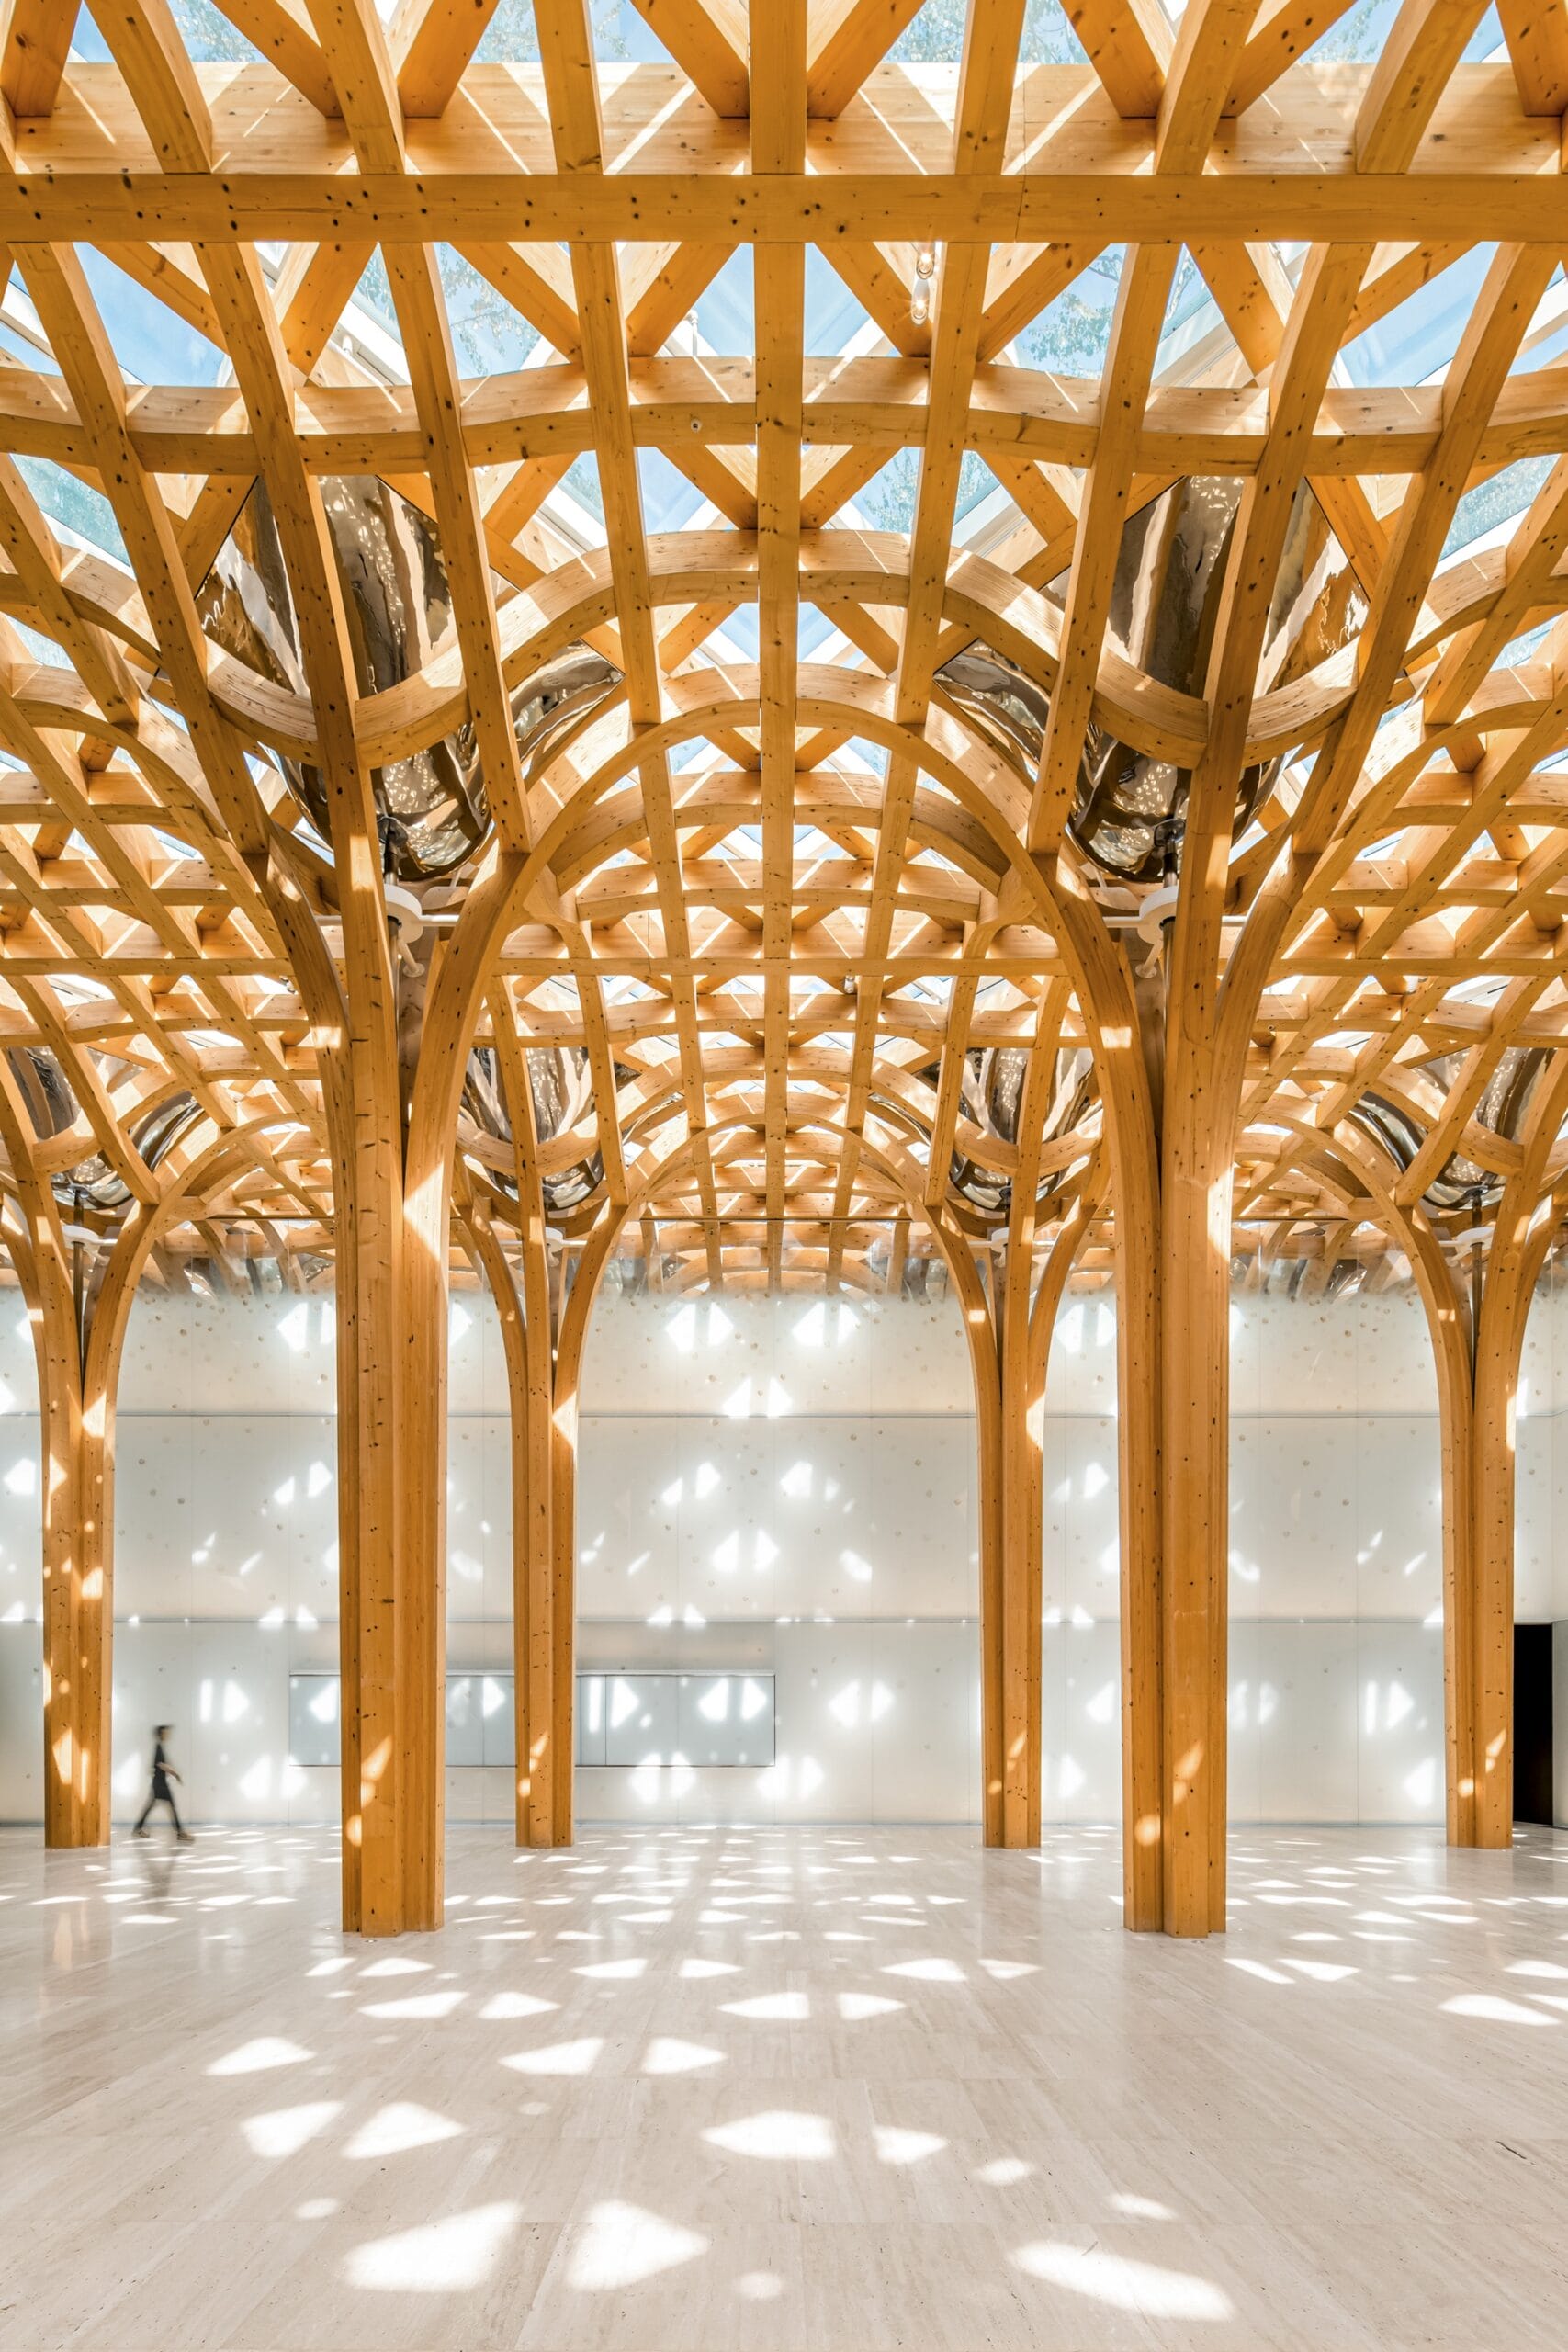 a vertical image of the interior of a sunlit architectural space with white floors and walls and intricate wooden latticework on the ceiling that blends into a series of support columns